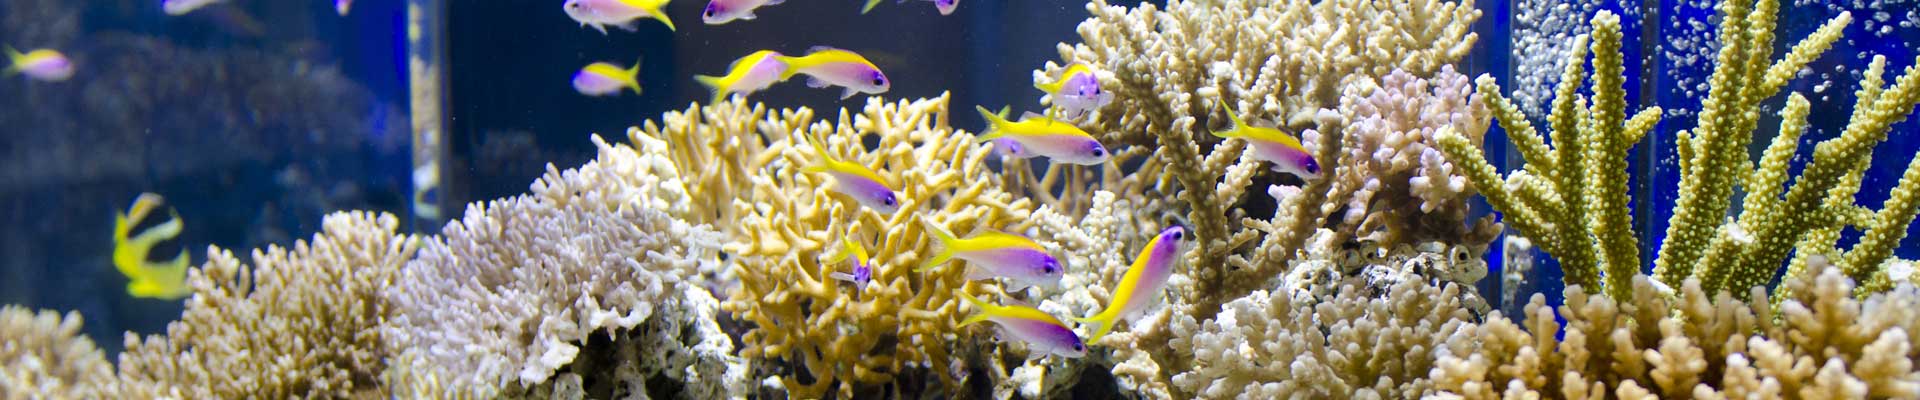 Large aquarium with various types of coral and fish